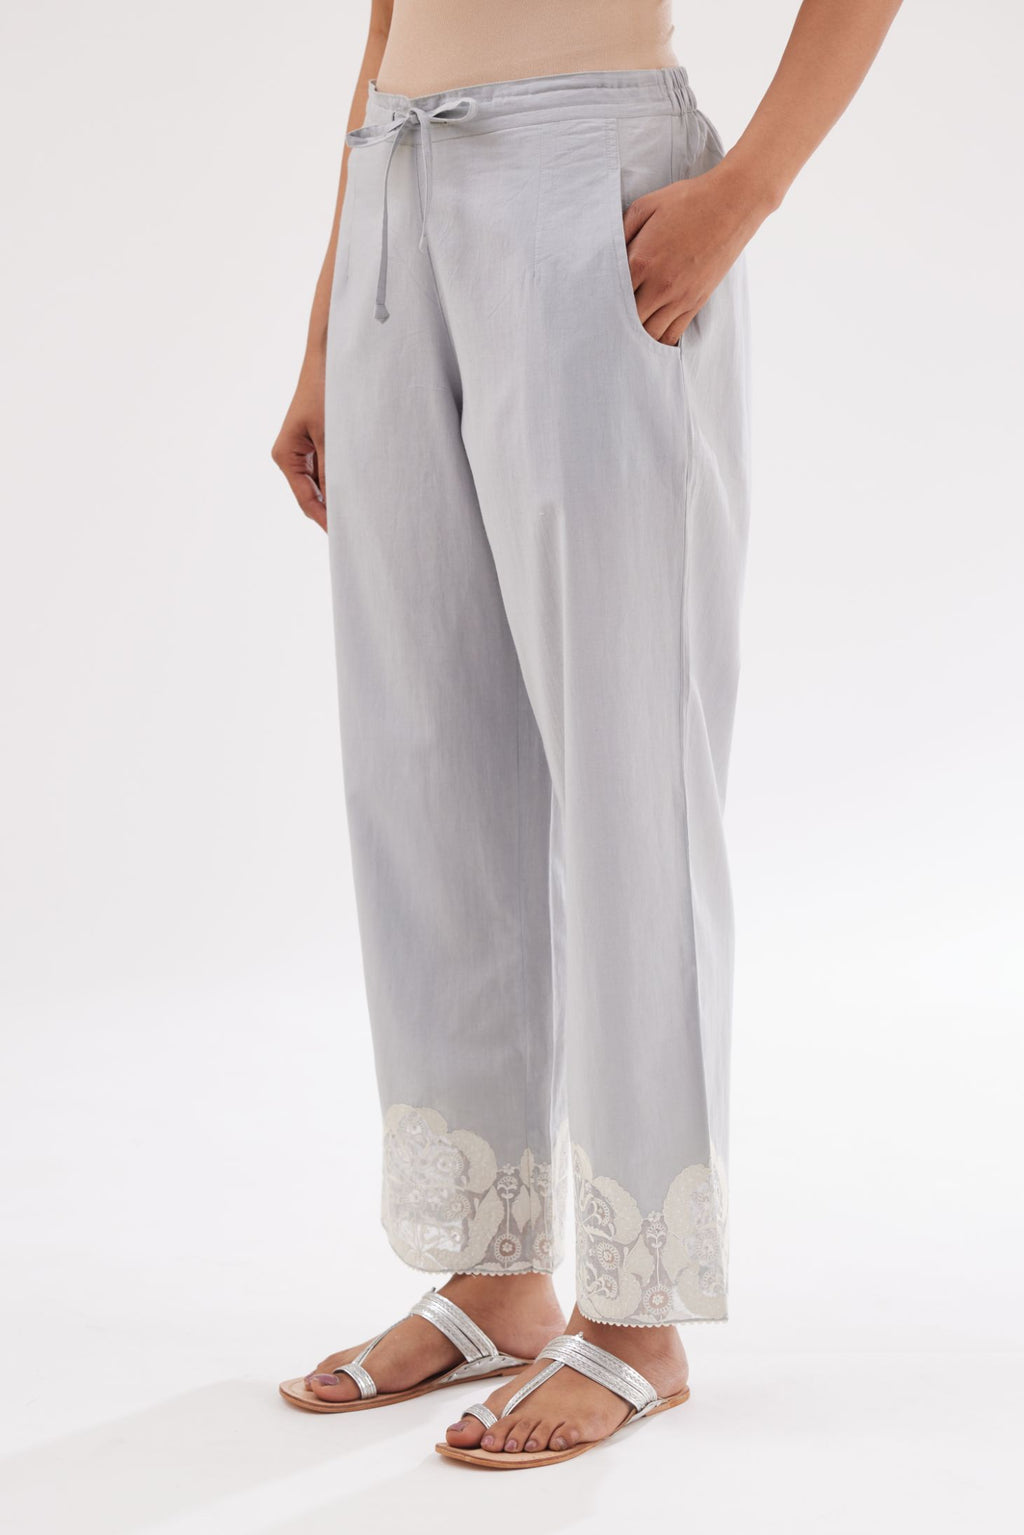 Blue cotton straight pants with appliqué and hand attached sequins detailing at bottom hem.